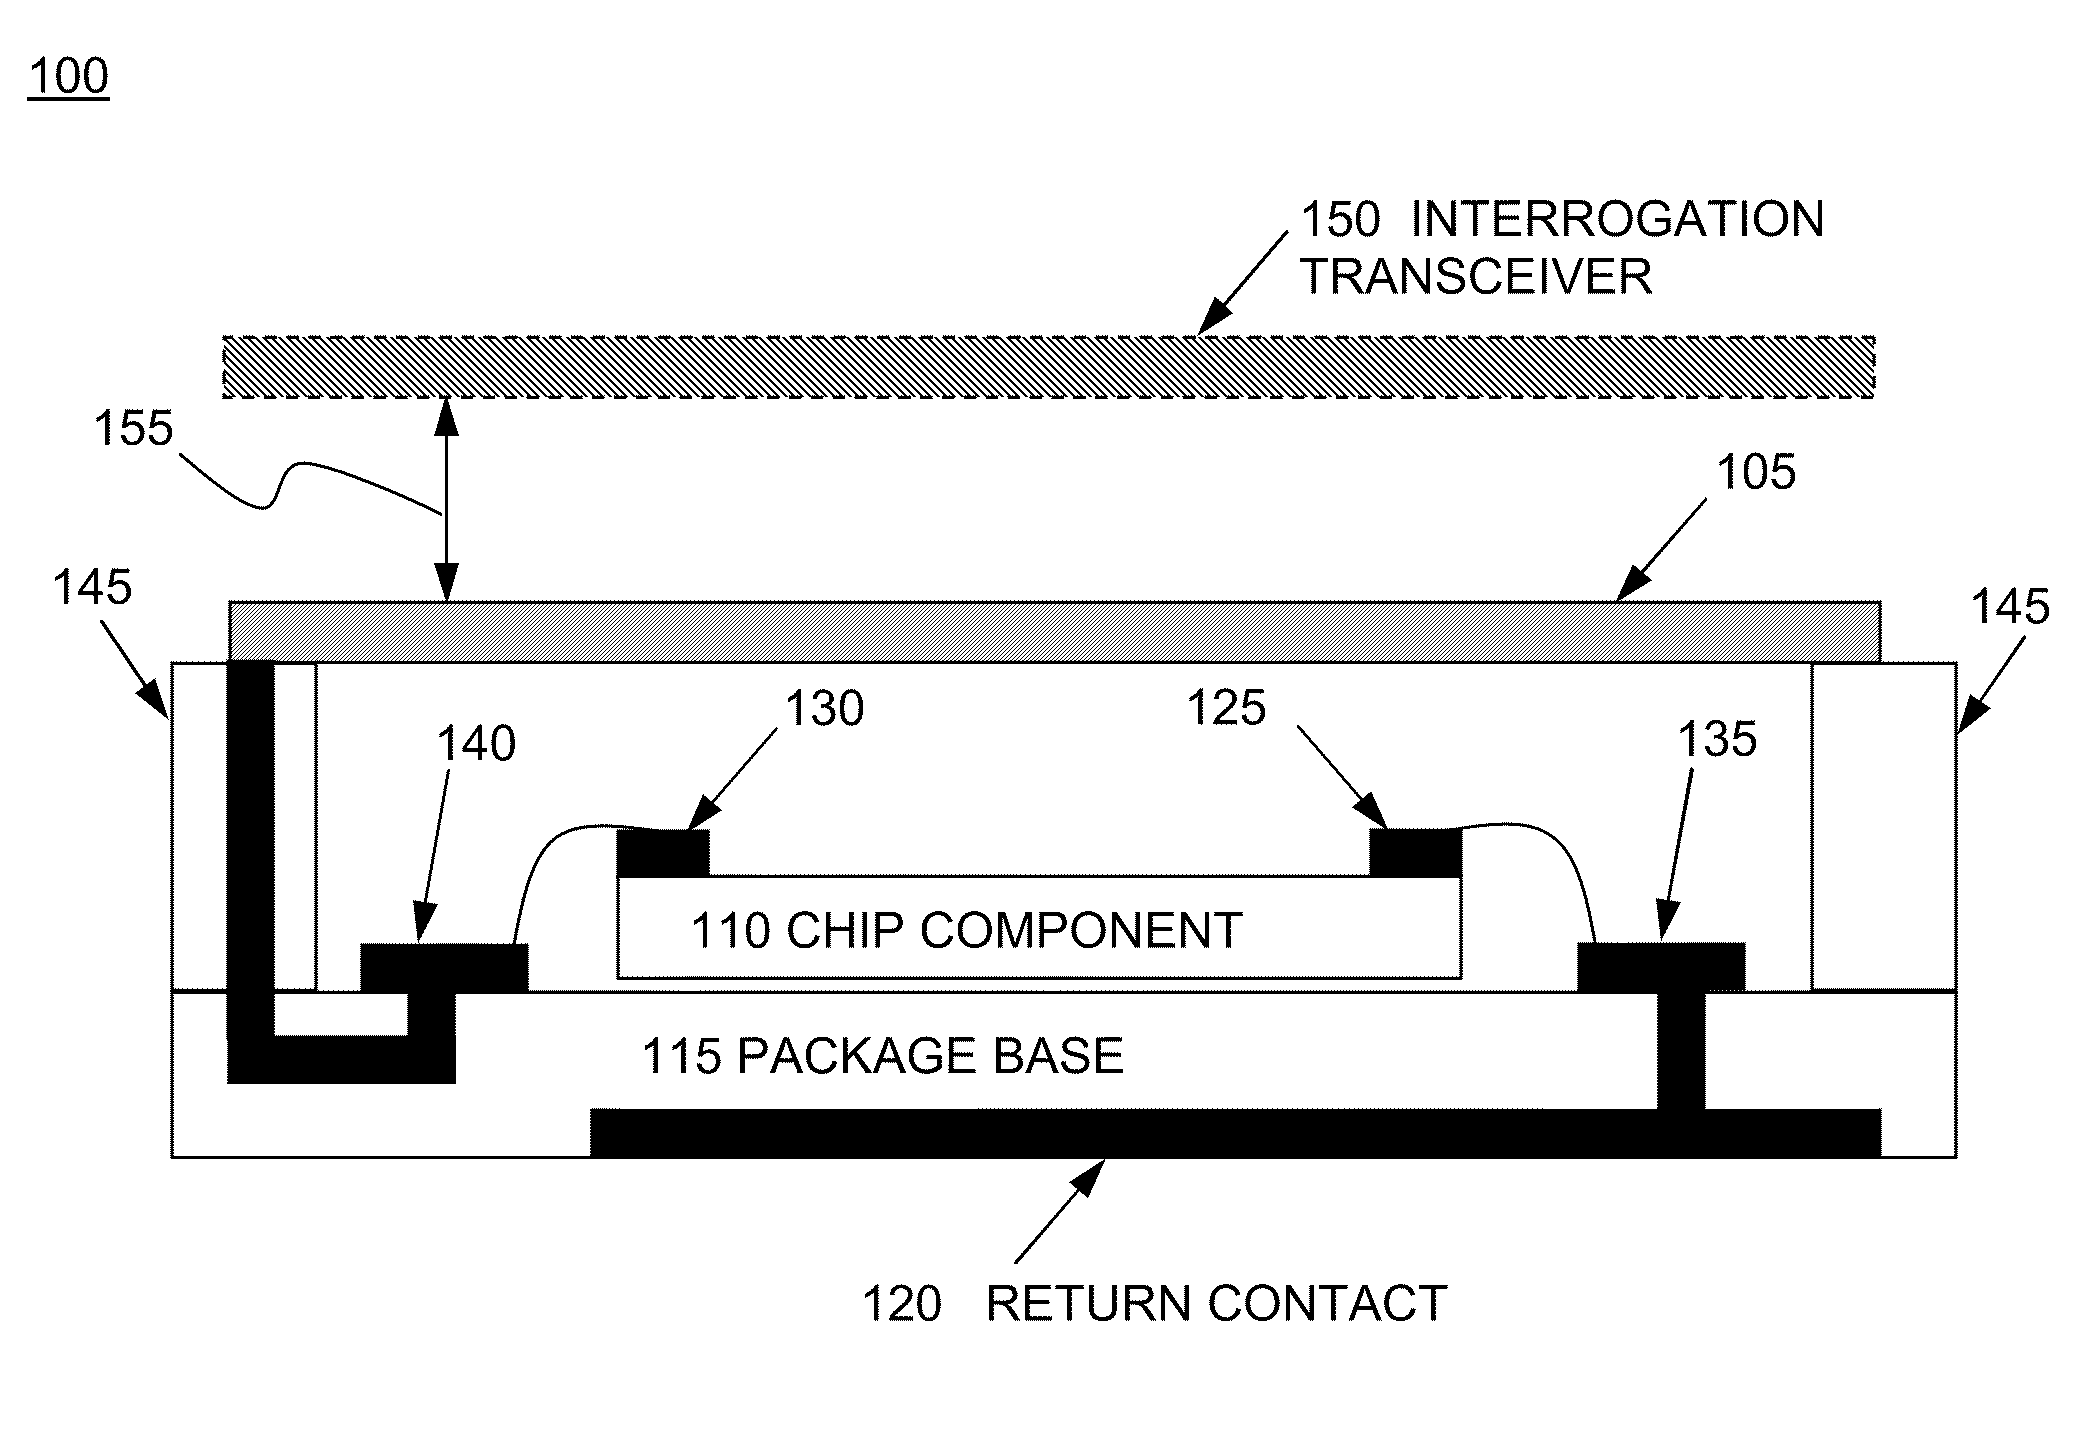 Integrated coupling structures